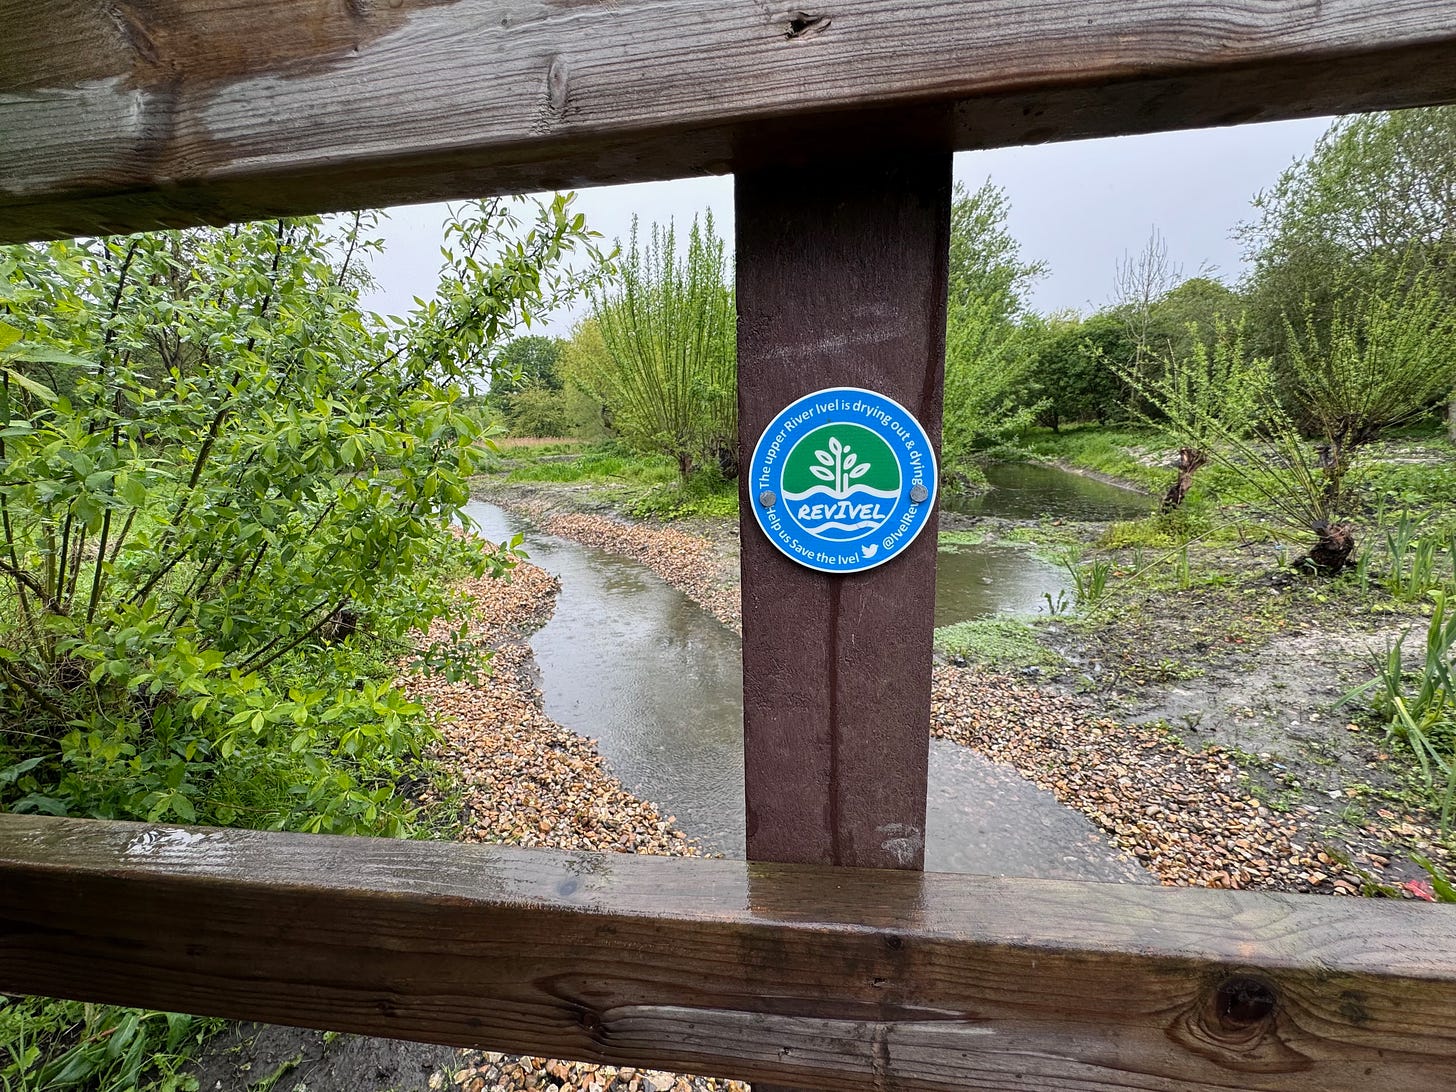 View through wooden fence looking out to the restored gravel beds and the start of the River Ivel chalk stream. On the central fence post is a RevIvel plaque which says, "The upper River Ivel is drying out and dying. Help us Save the Ivel (Twitter/X logo) @IvelRev"